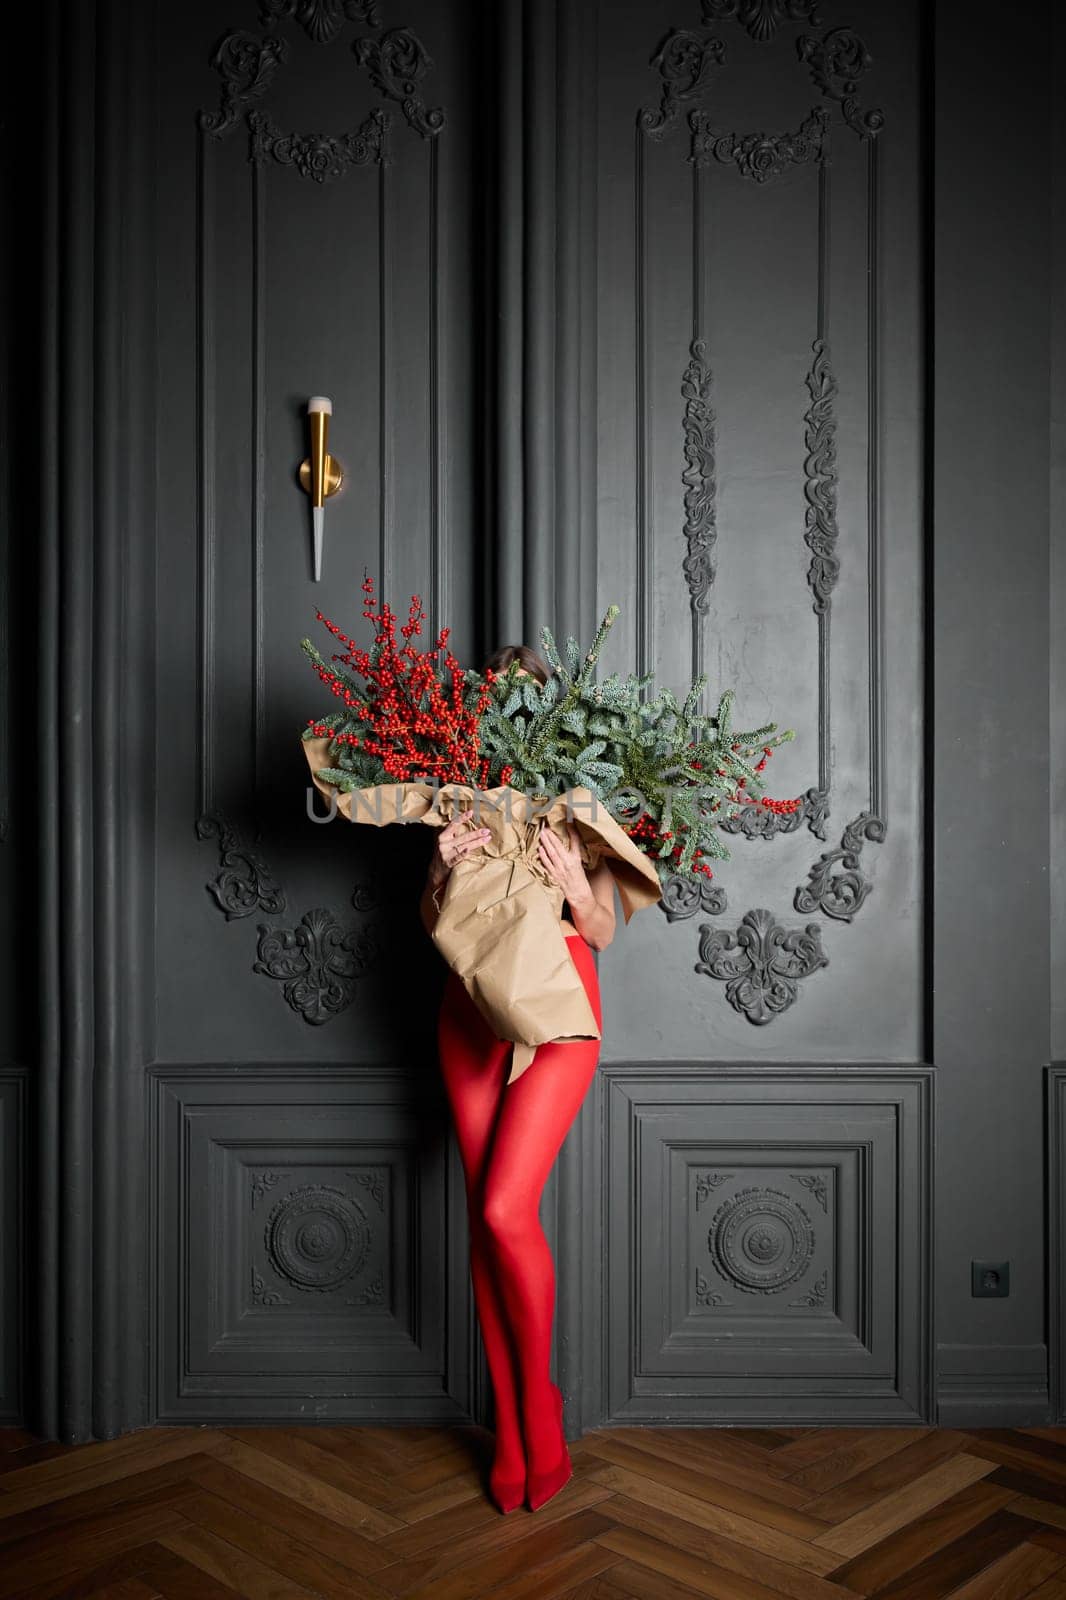 A long girl in red tights and high-heeled shoes holds a huge bouquet of fir branches and red berries wrapped in cardboard paper, she closes with a bouquet, photo studio with grey wall background. High quality 4k footage